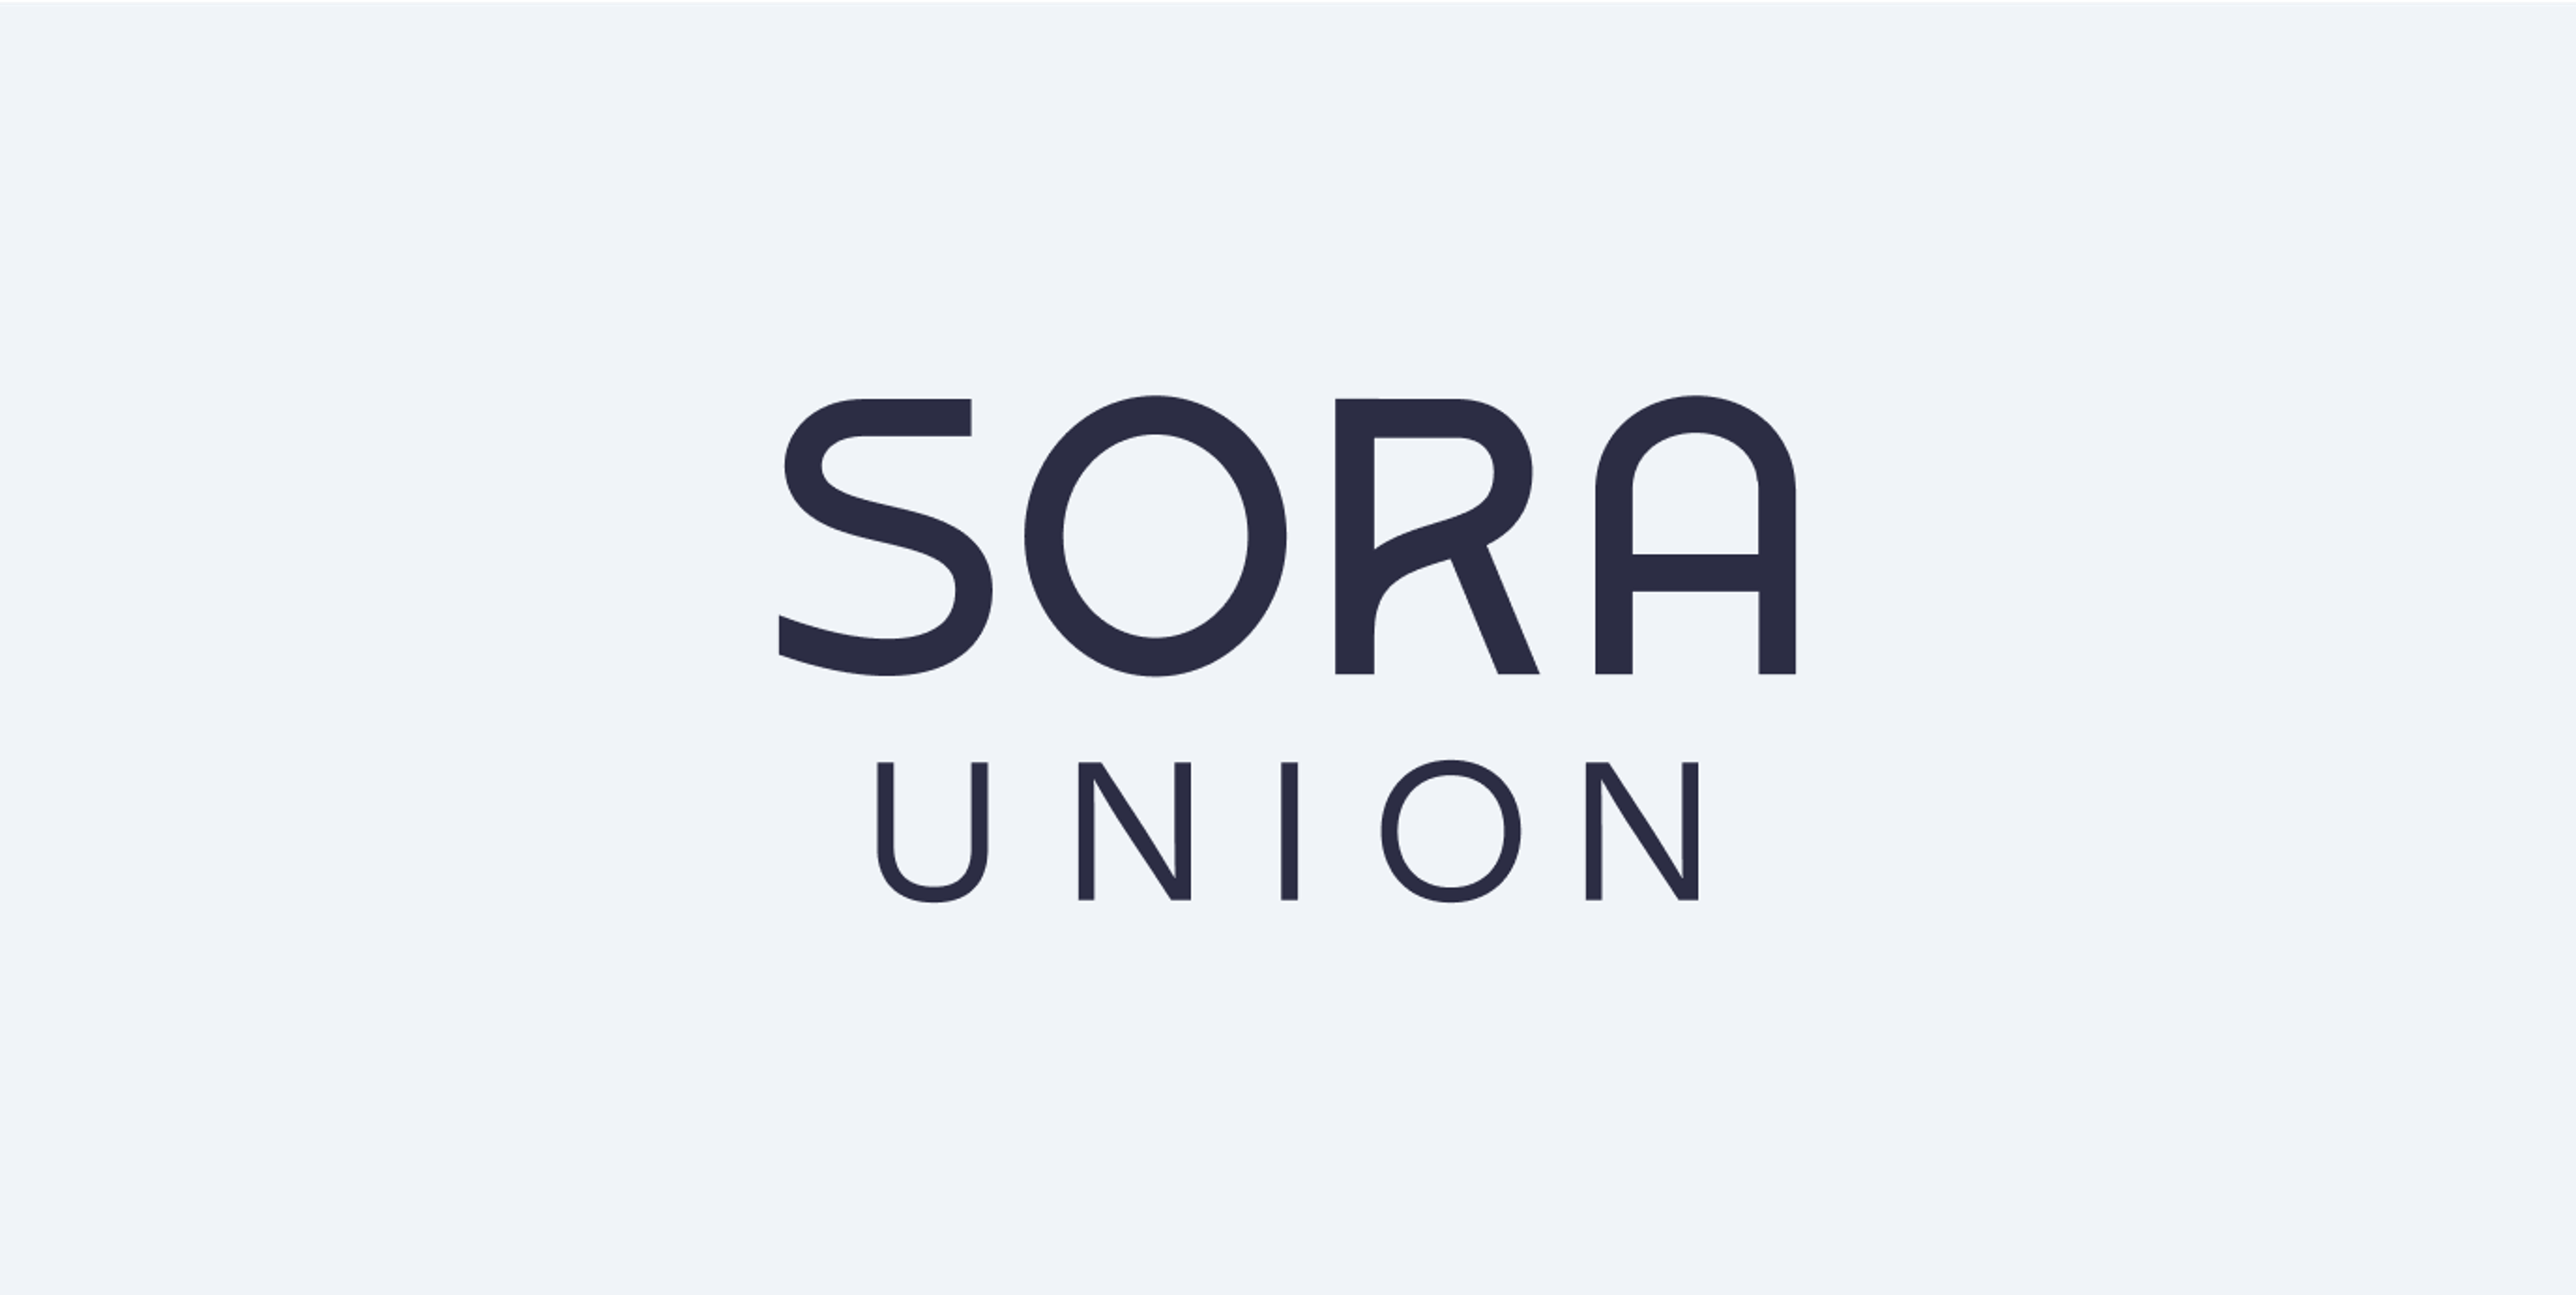 Sora Union wordmark with dark blue capitalized letters in a rounded sans-serif typeface